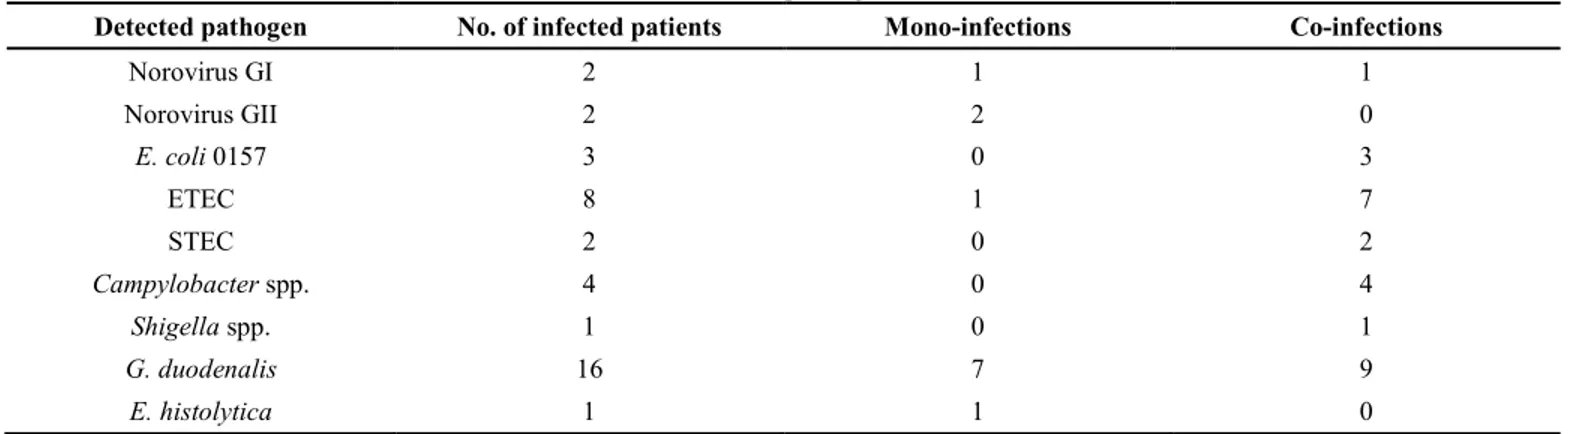 Table 2. Number of mono- and co-infections for each detected pathogen 